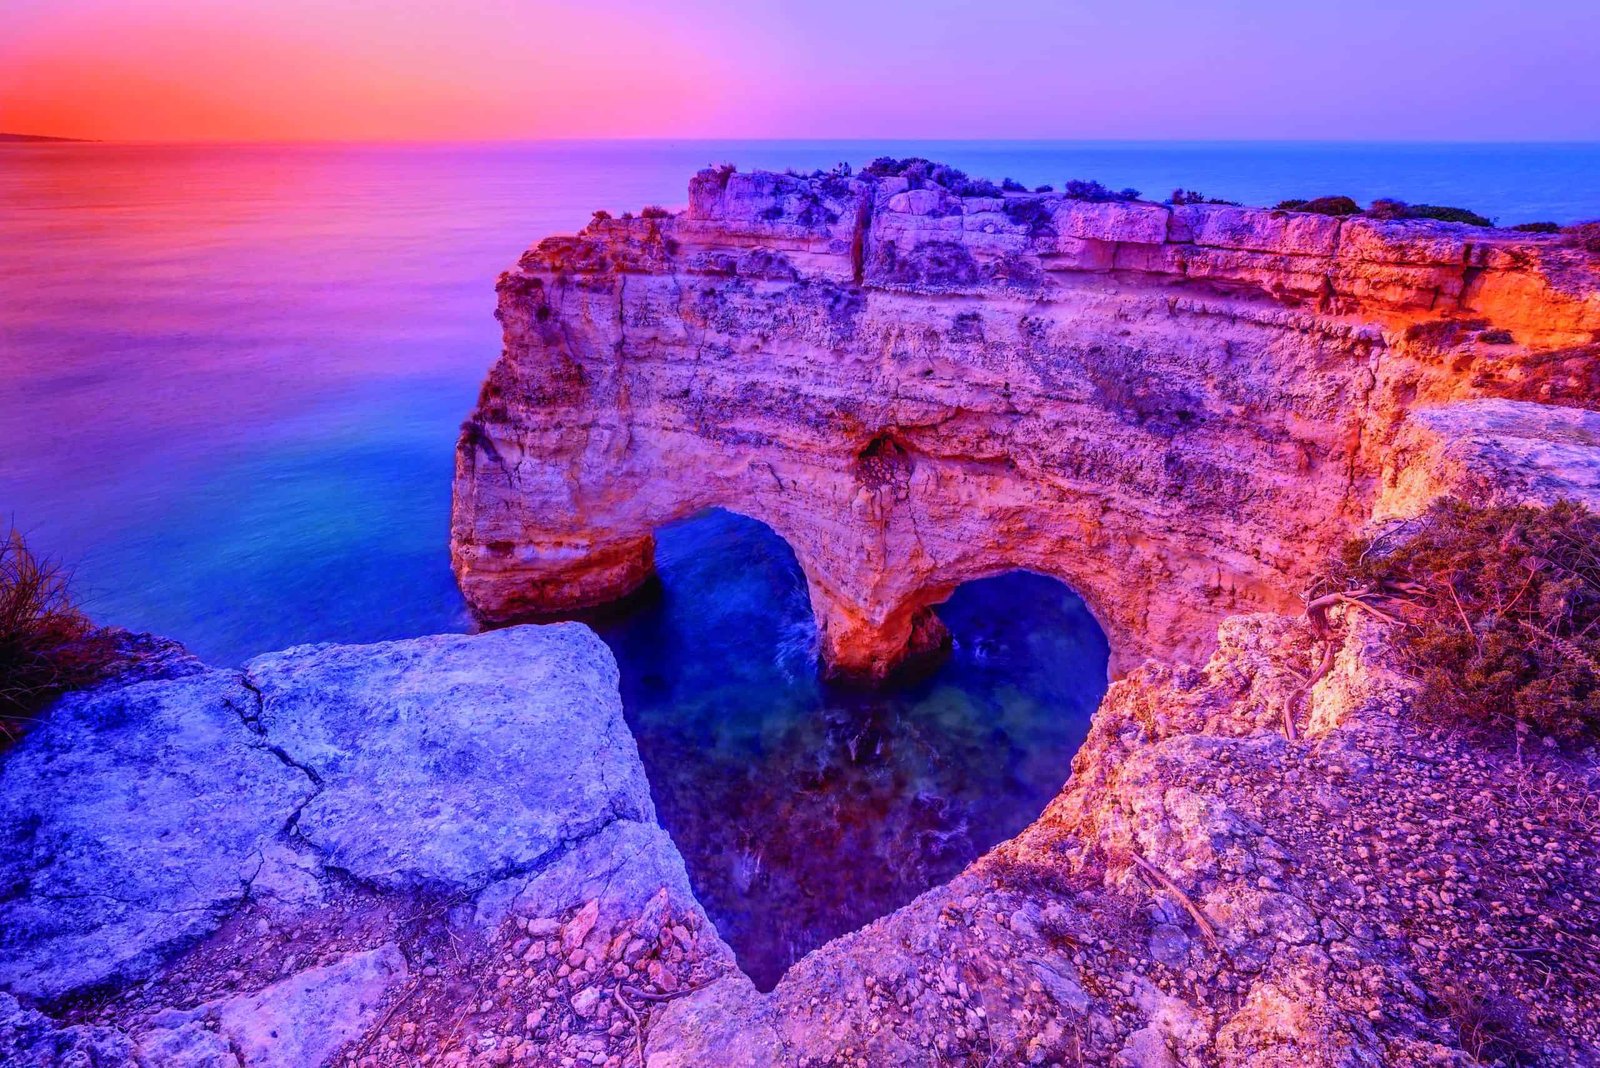 A dreamy heart-shaped cliff turning reality, overlooking the ocean at sunset.